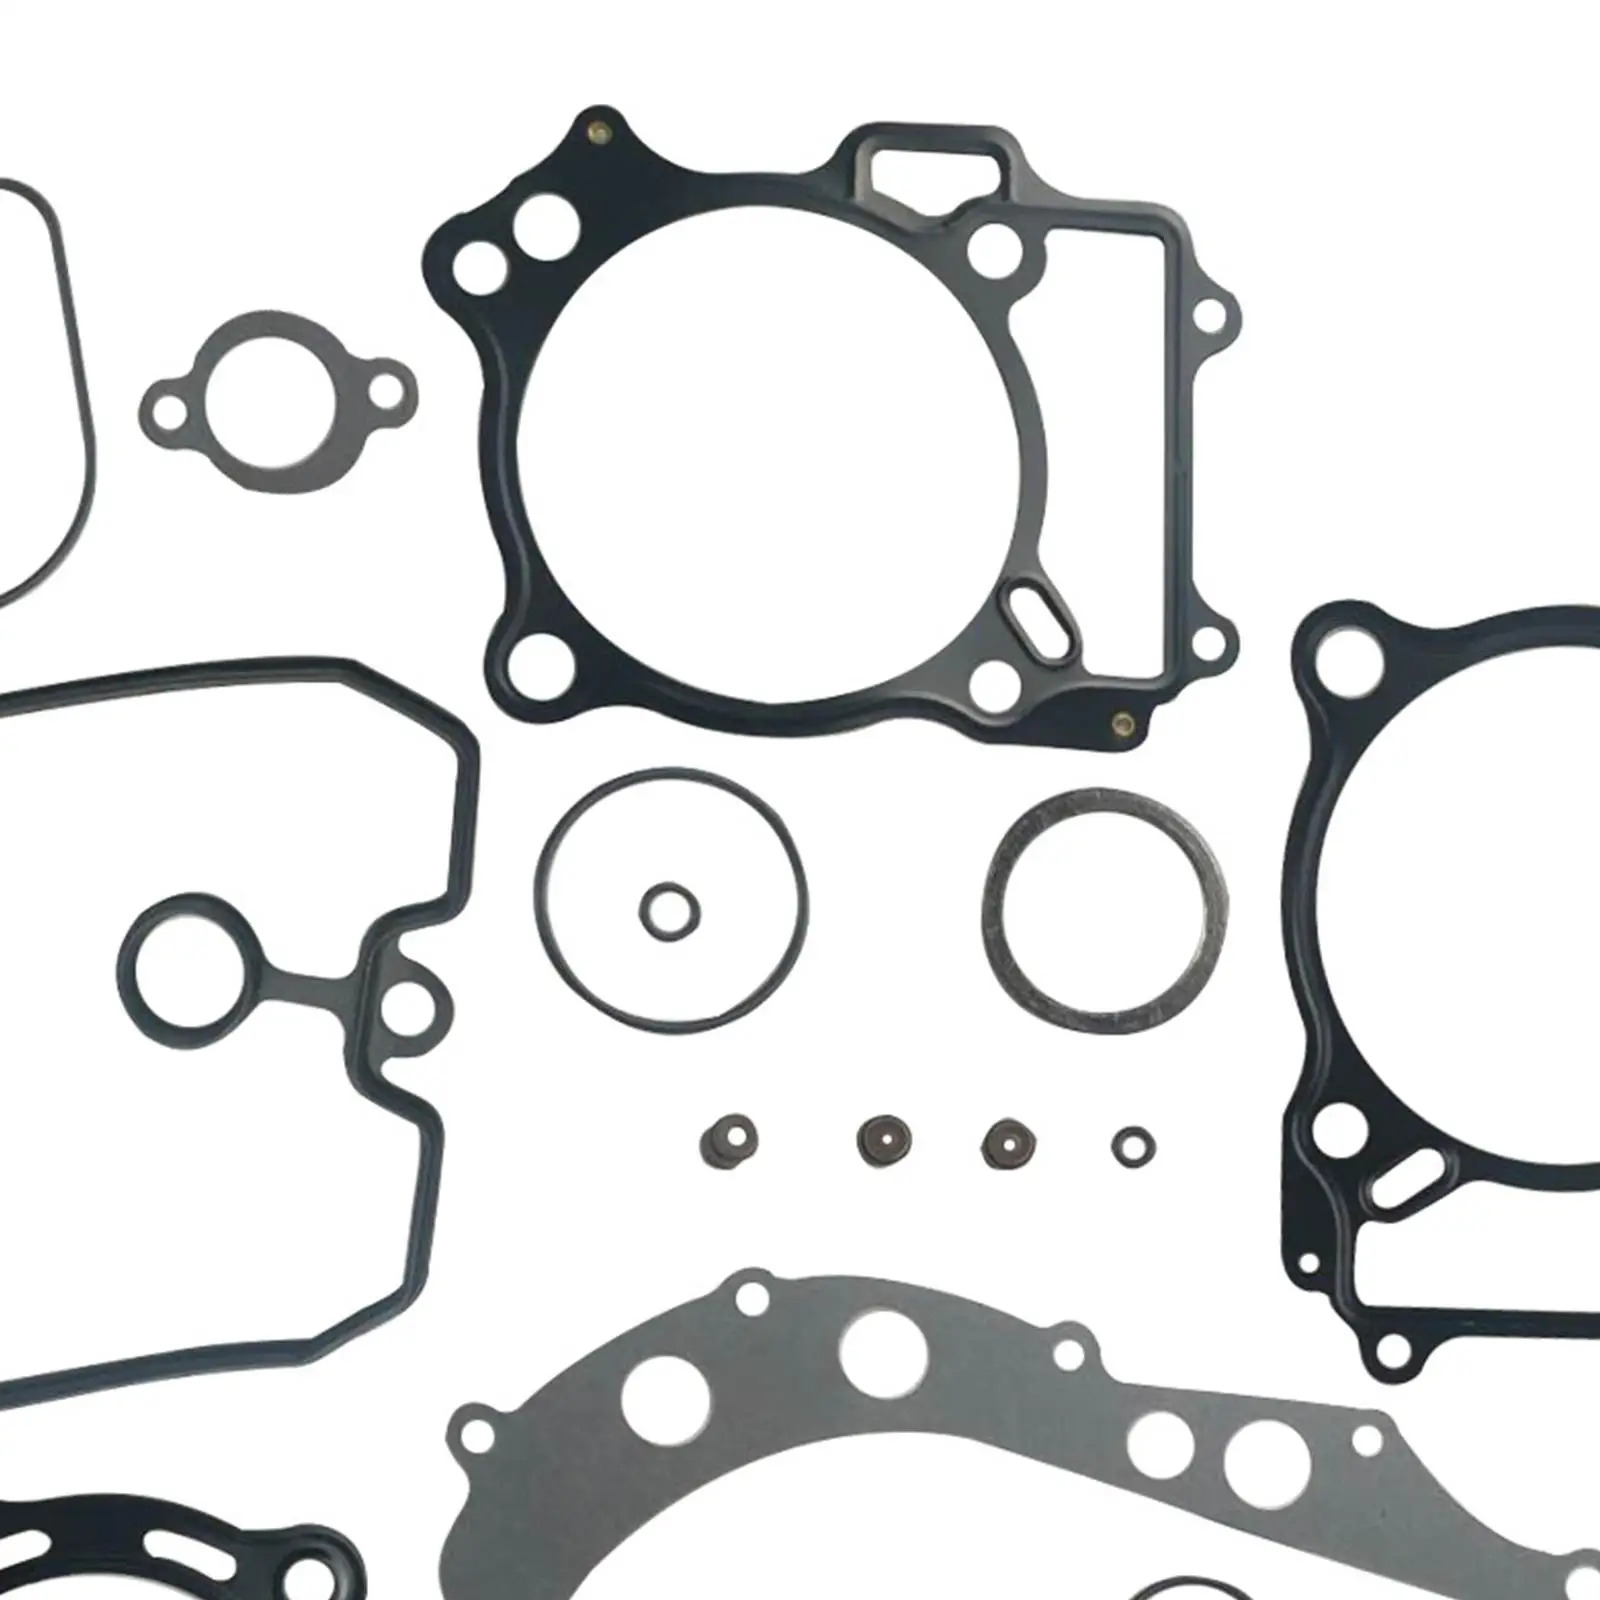 Complete Gasket Set 0934-1676 with Oil seals and Bottom End Accessories Motorcycle Supplies Spare Parts Durable